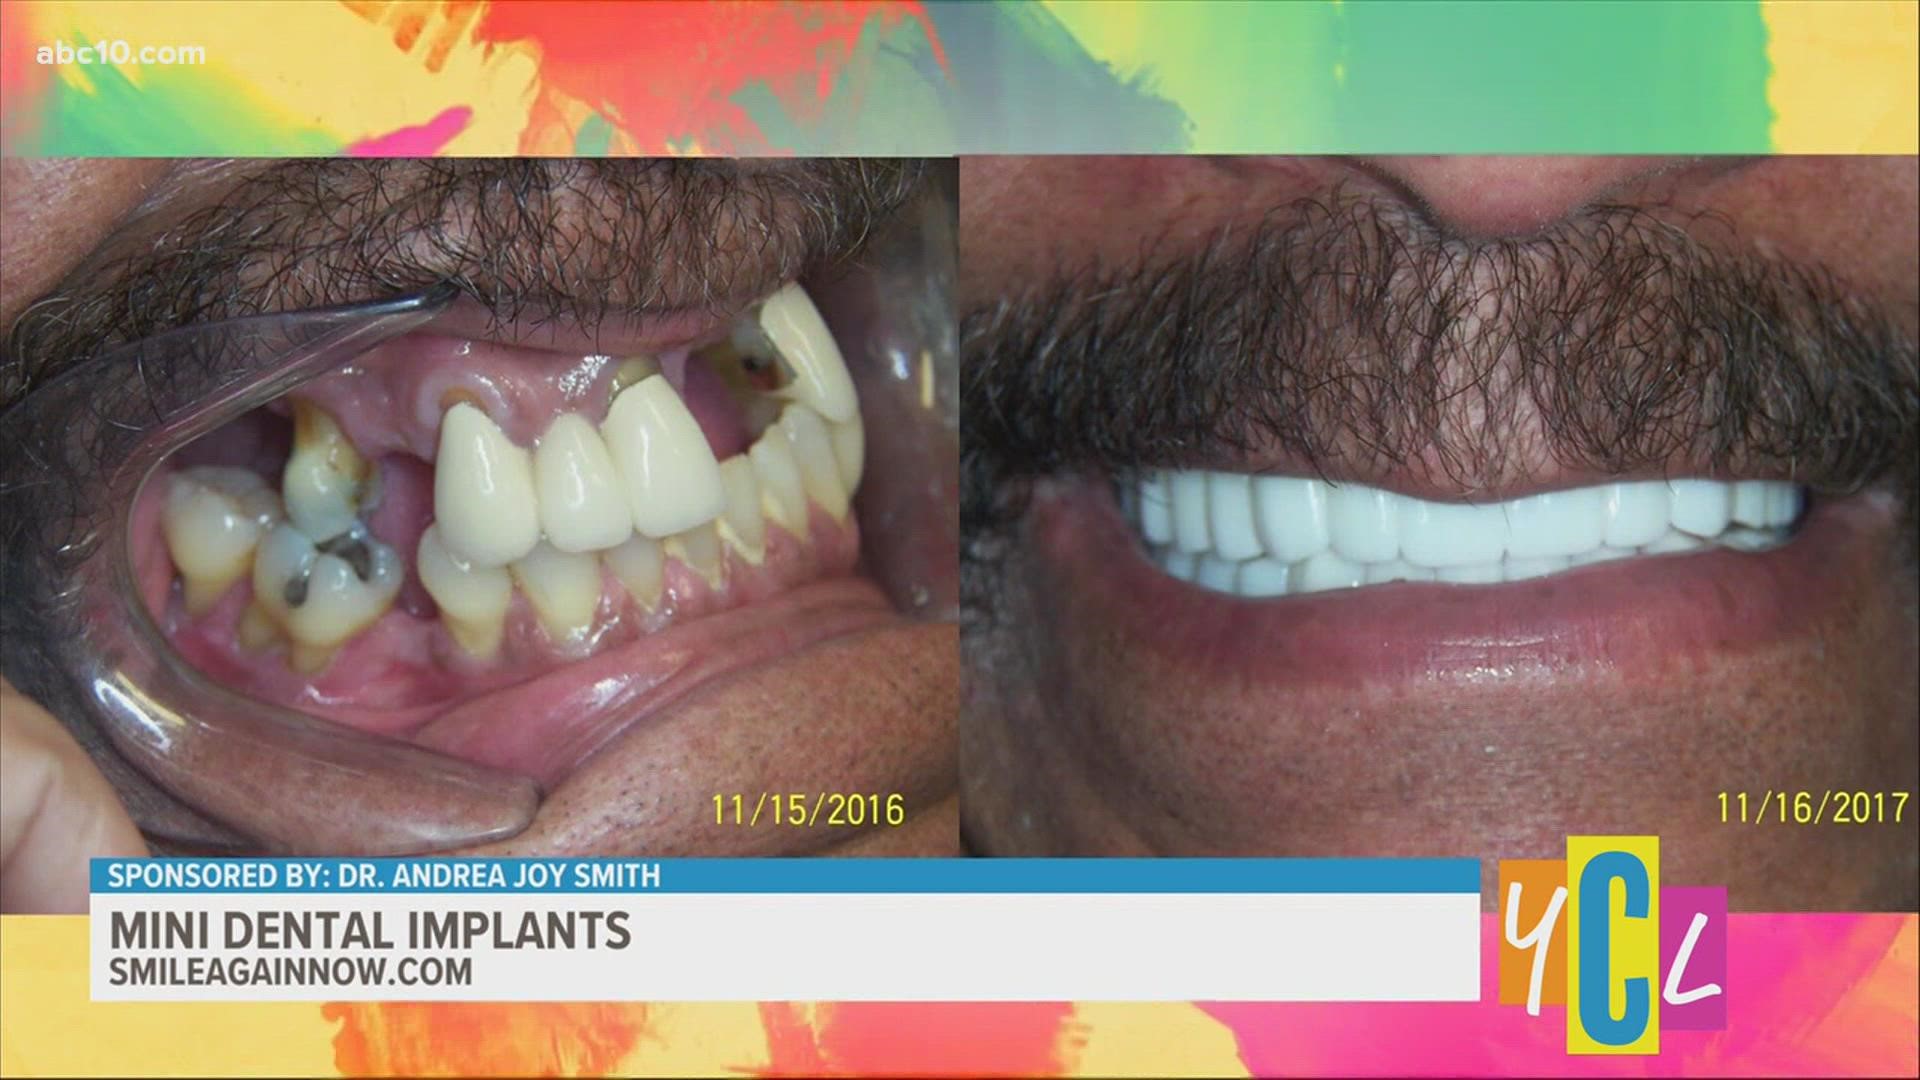 If smiling has you frowning due to missing teeth, consider trying mini dental implants. This segment paid for by Dr. Andrea Joy Smith.